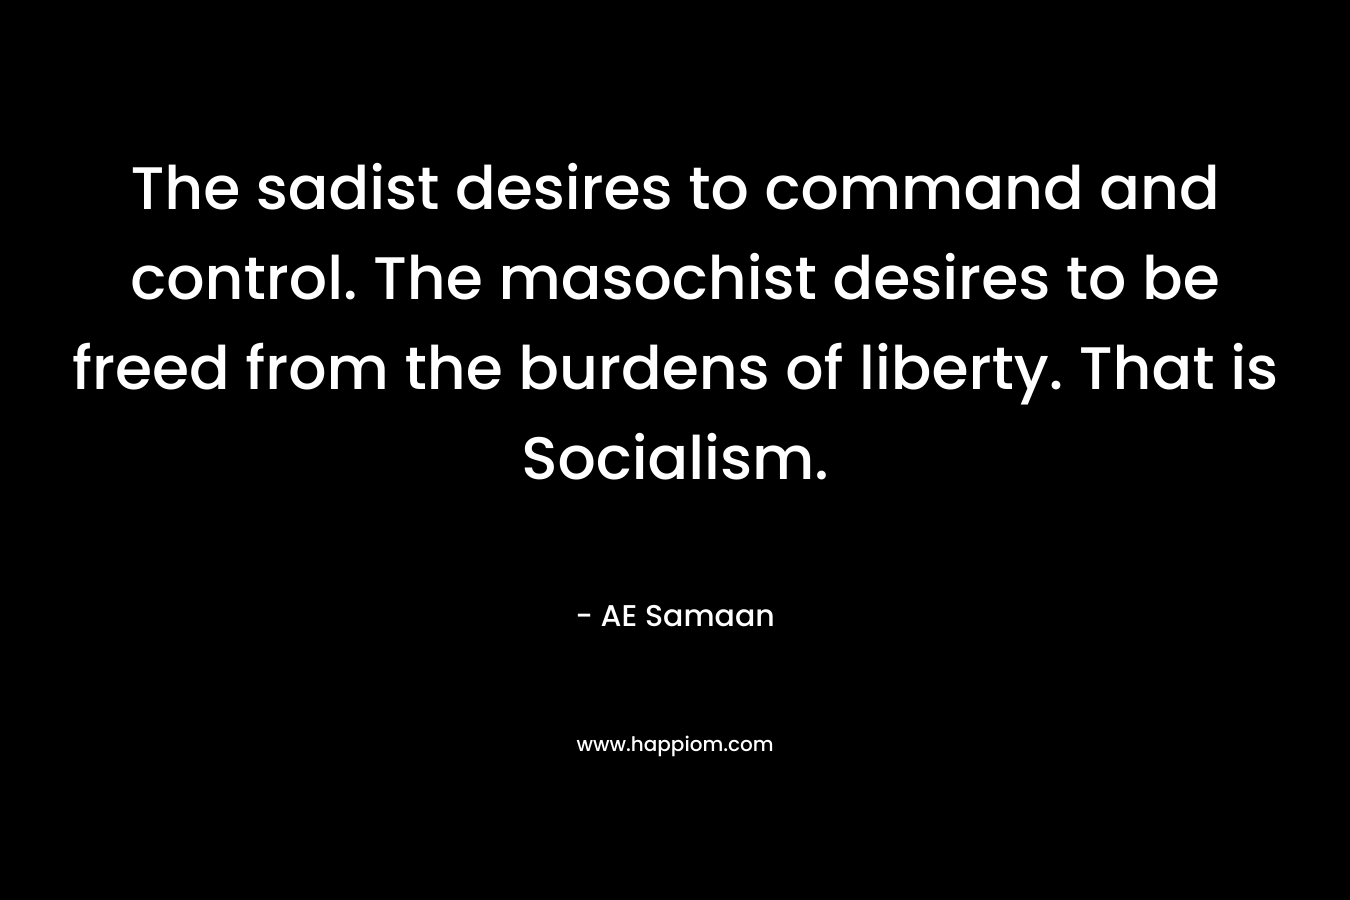 The sadist desires to command and control. The masochist desires to be freed from the burdens of liberty. That is Socialism. – AE Samaan